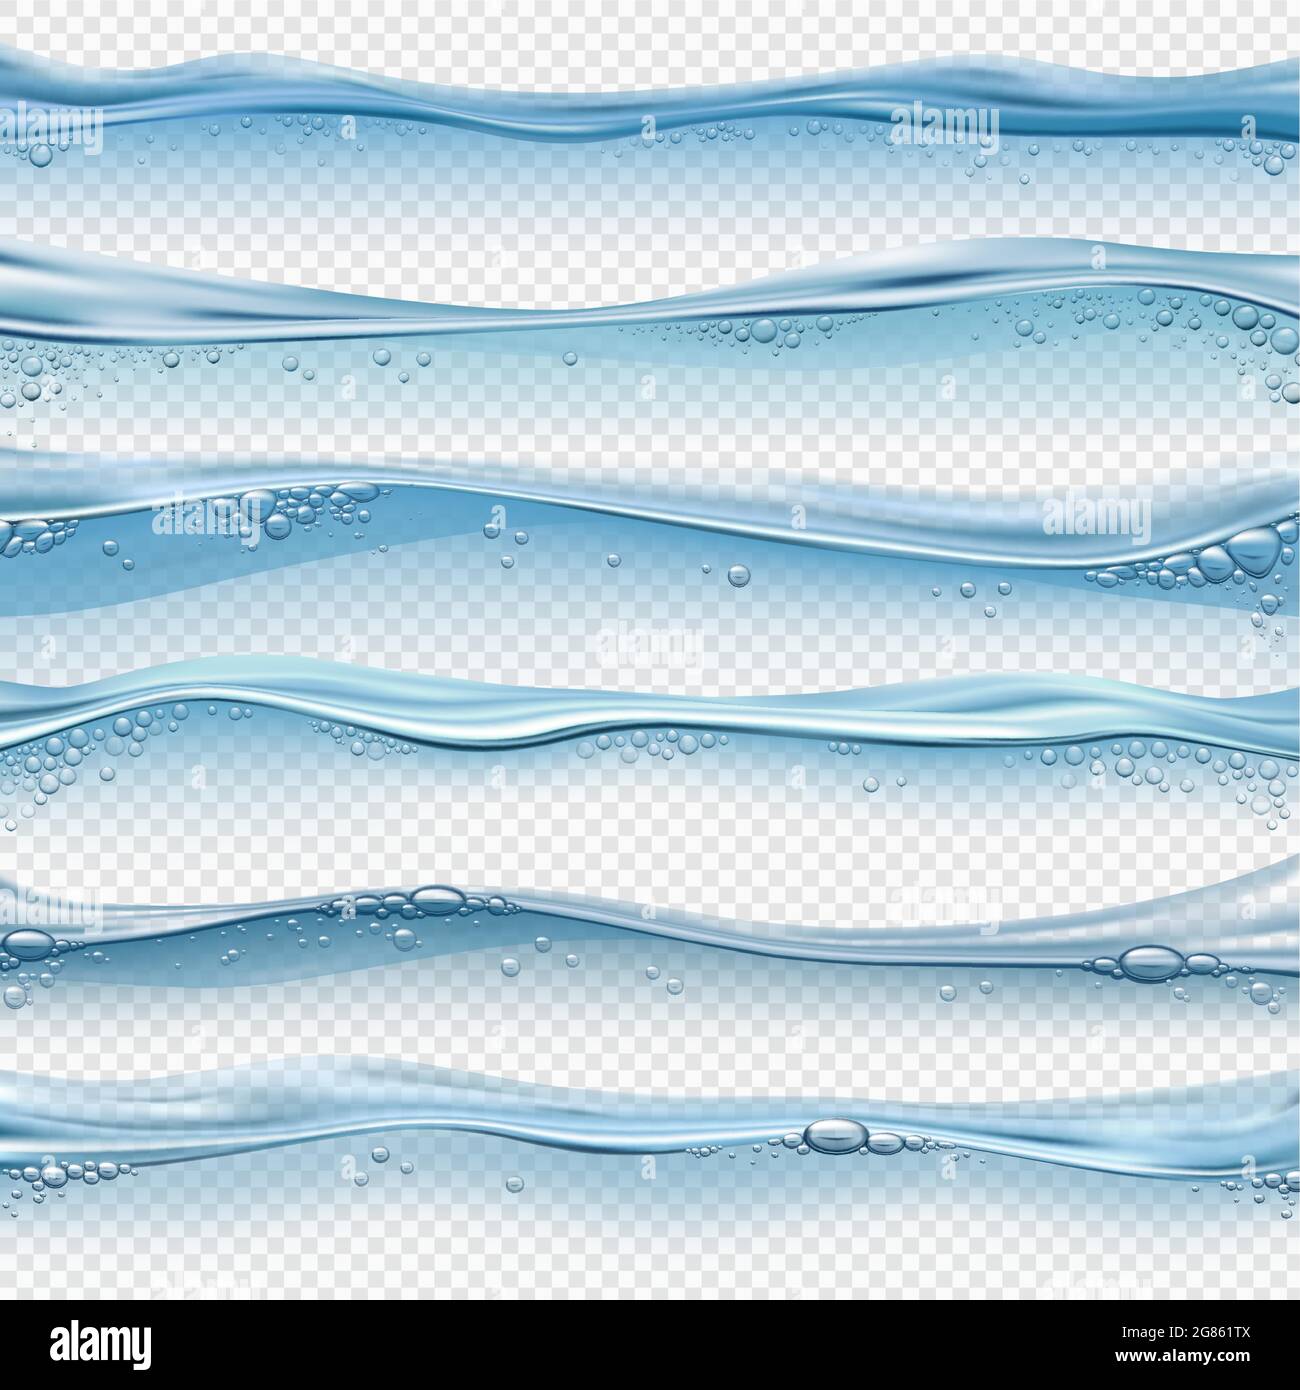 Realistic water waves. Sea, ocean or pool liquid surface with bubbles and splashes. Waterline and transparent underwater effect vector set Stock Vector